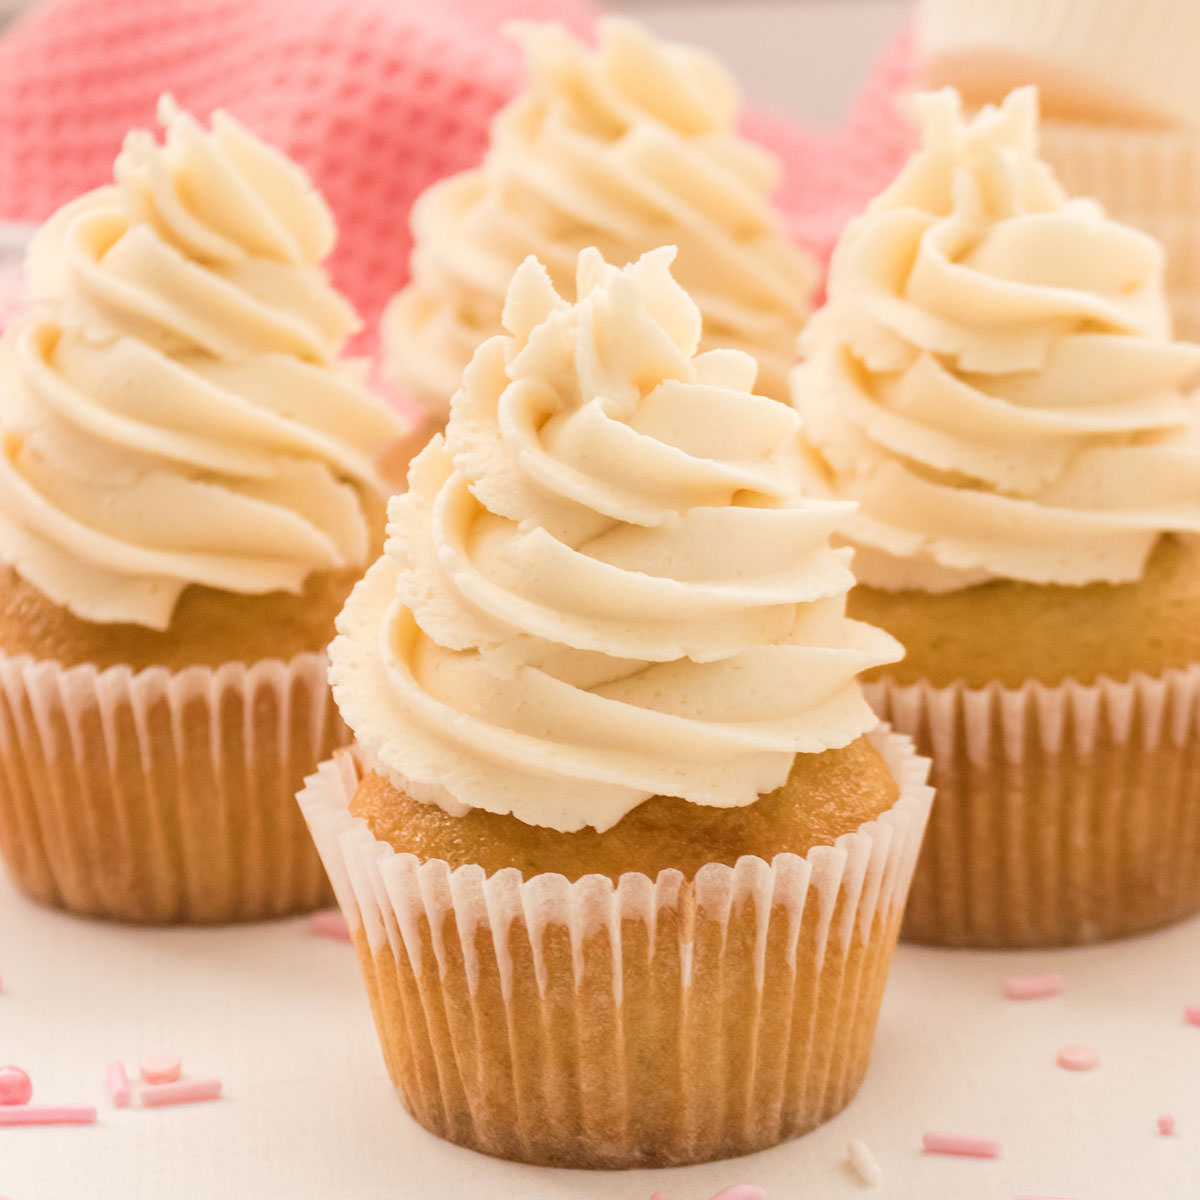 https://www.twosisterscrafting.com/wp-content/uploads/2021/03/homemade-vanilla-cupcakes-featured.jpg